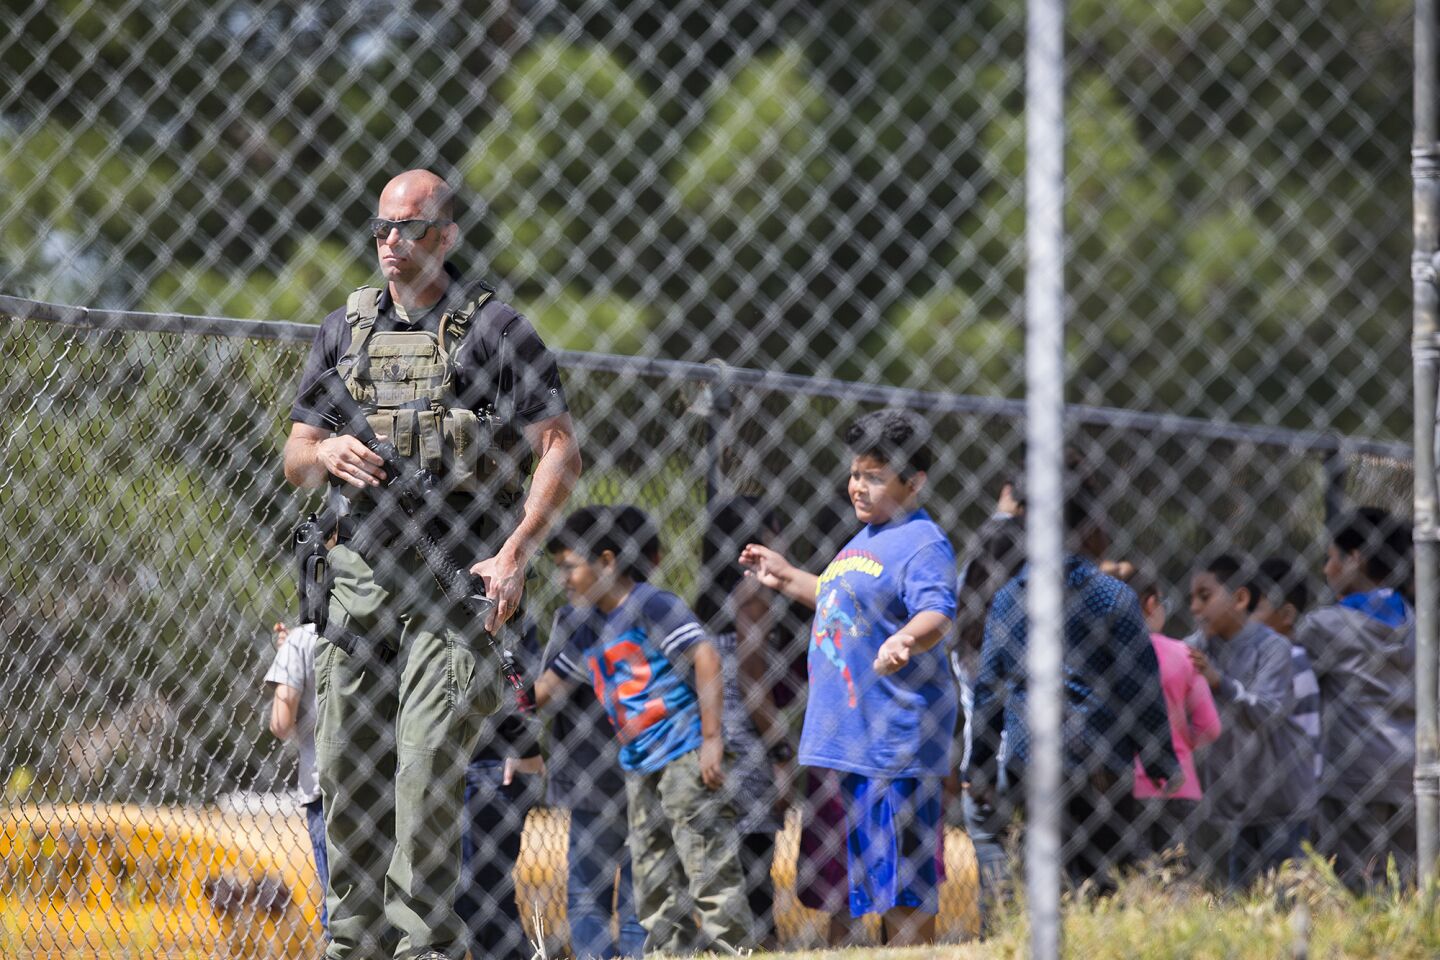 A SWAT officer stands guard with evacuated children on the playground at North Park Elementary School in San Bernardino after a shooting in the school.